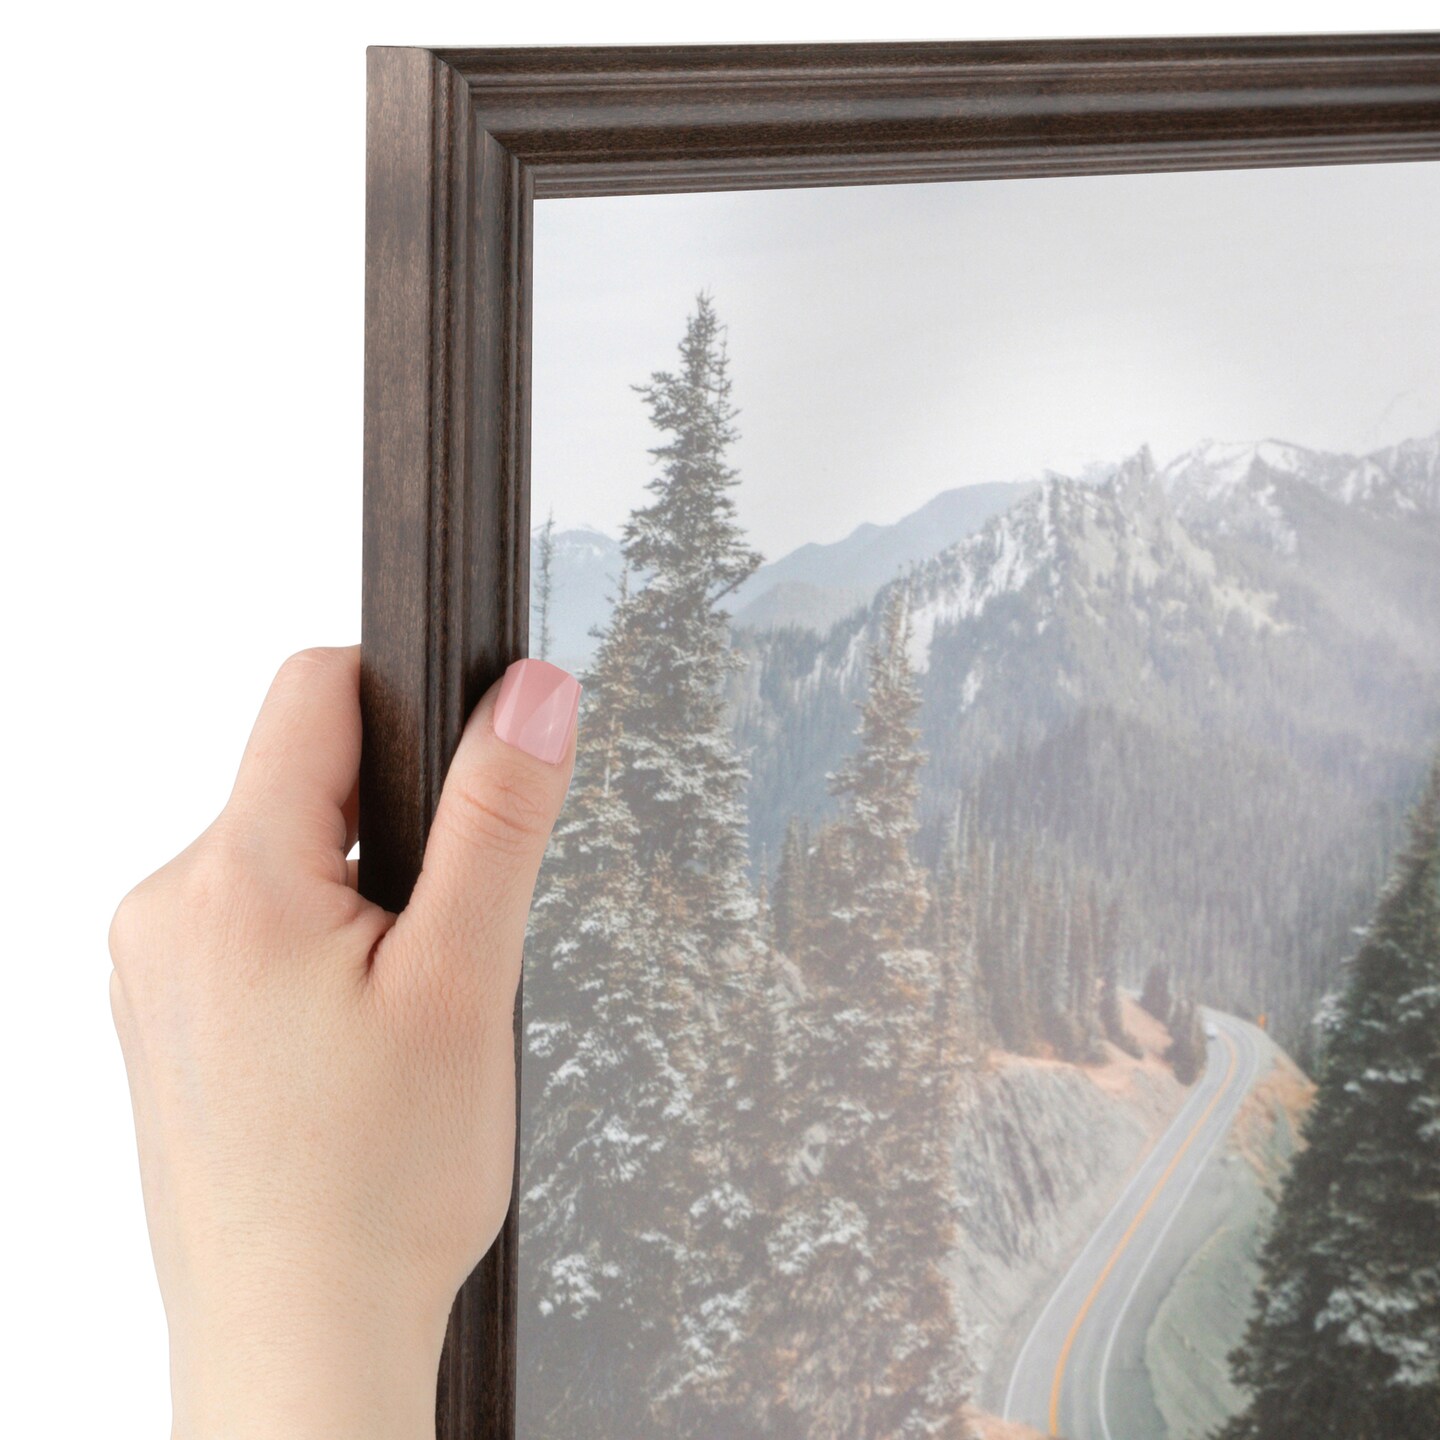 ArtToFrames 11x17 Inch  Picture Frame, This 1 Inch Custom Wood Poster Frame is Available in Multiple Colors, Great for Your Art or Photos - Comes with Regular Glass and  Corrugated Backing (A9HI)